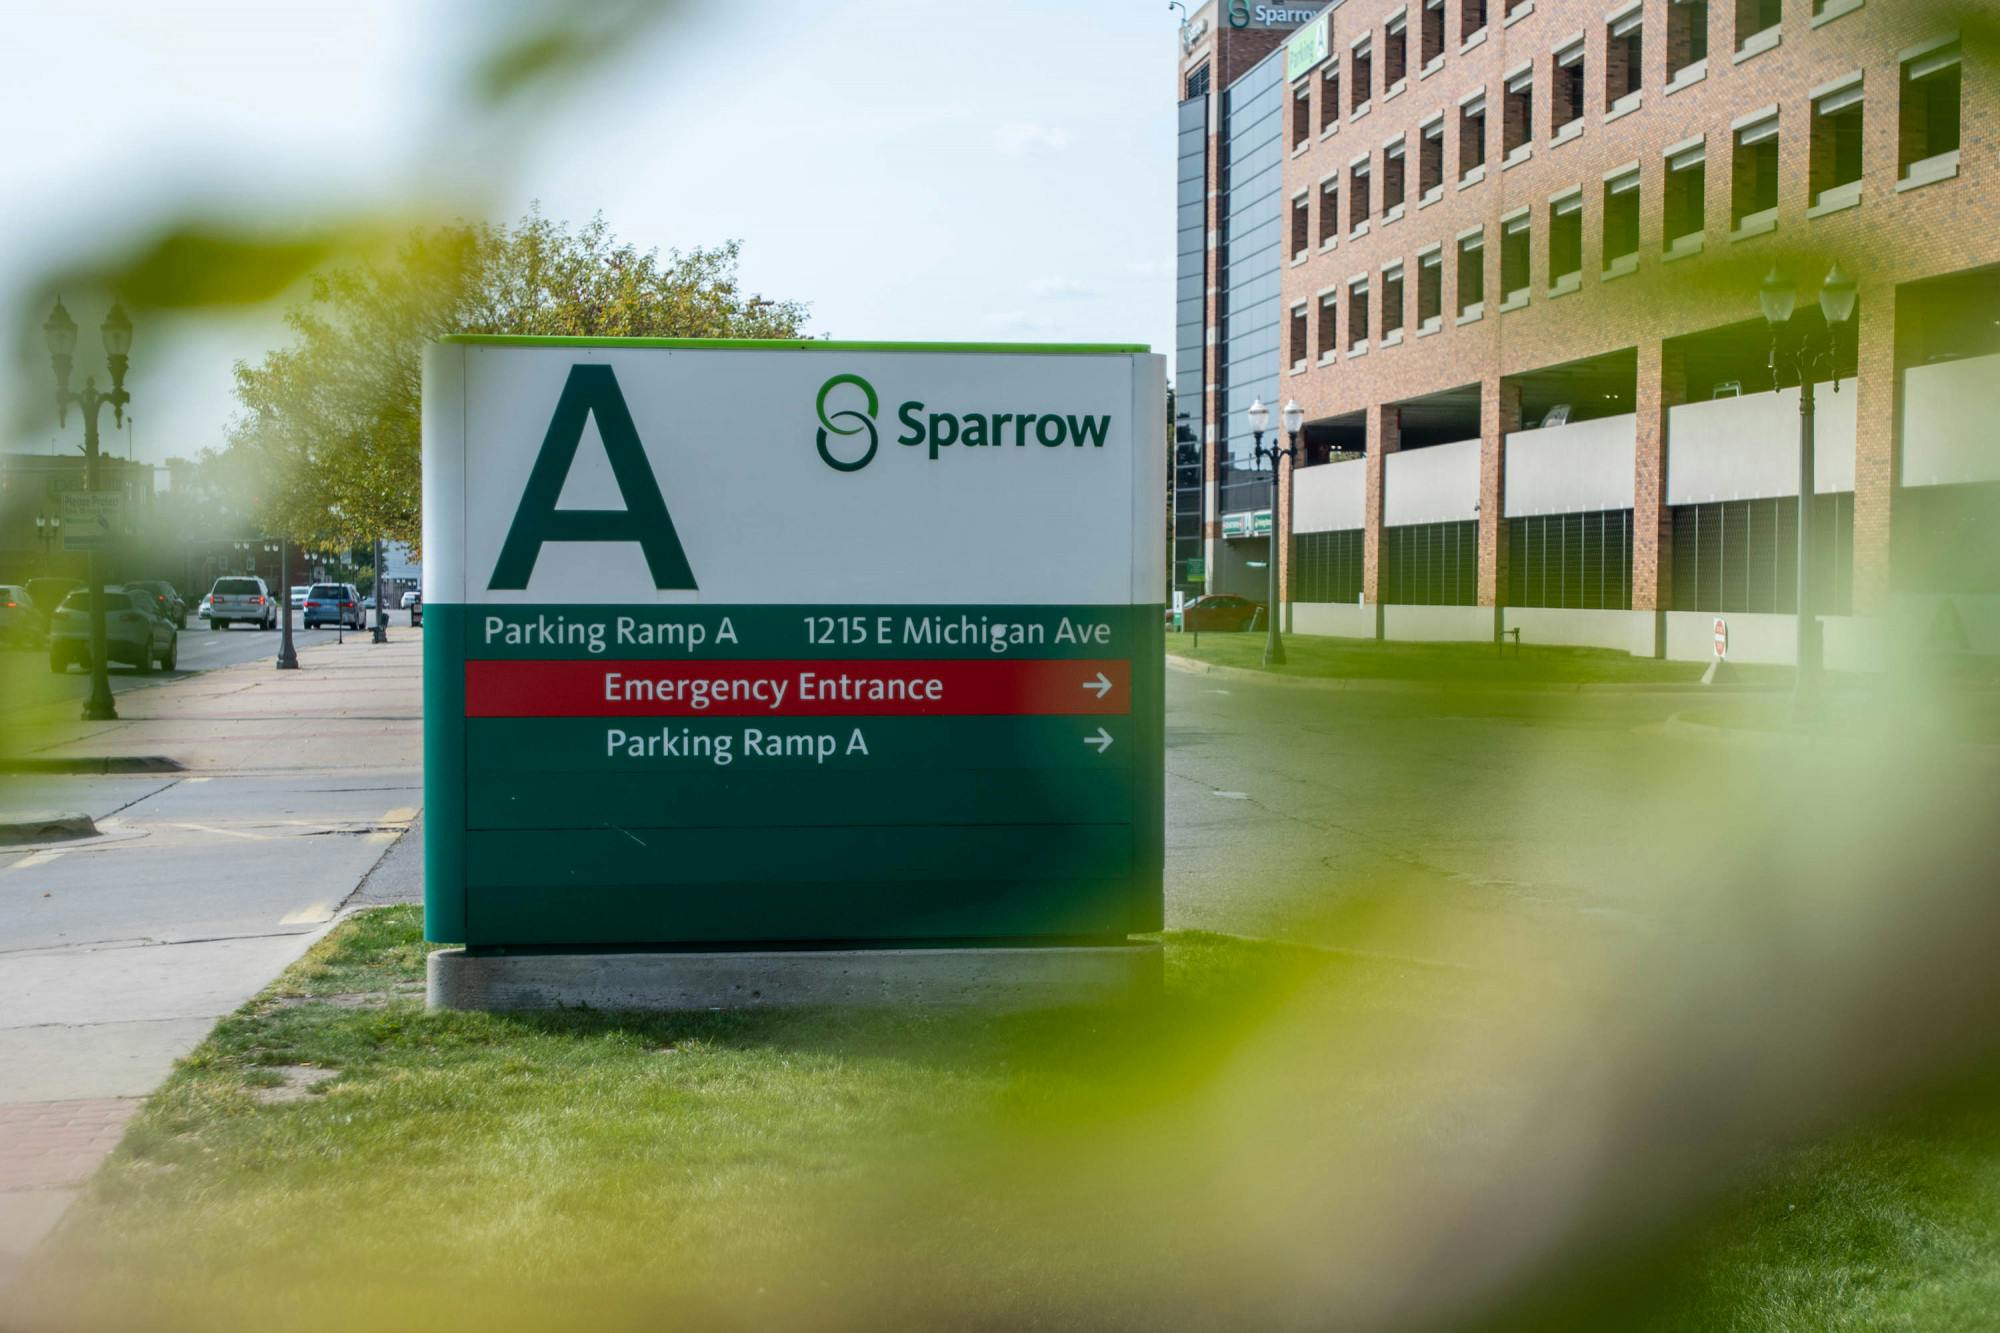 The exterior of Sparrow Hospital in Lansing, MI on Sept. 23, 2020.